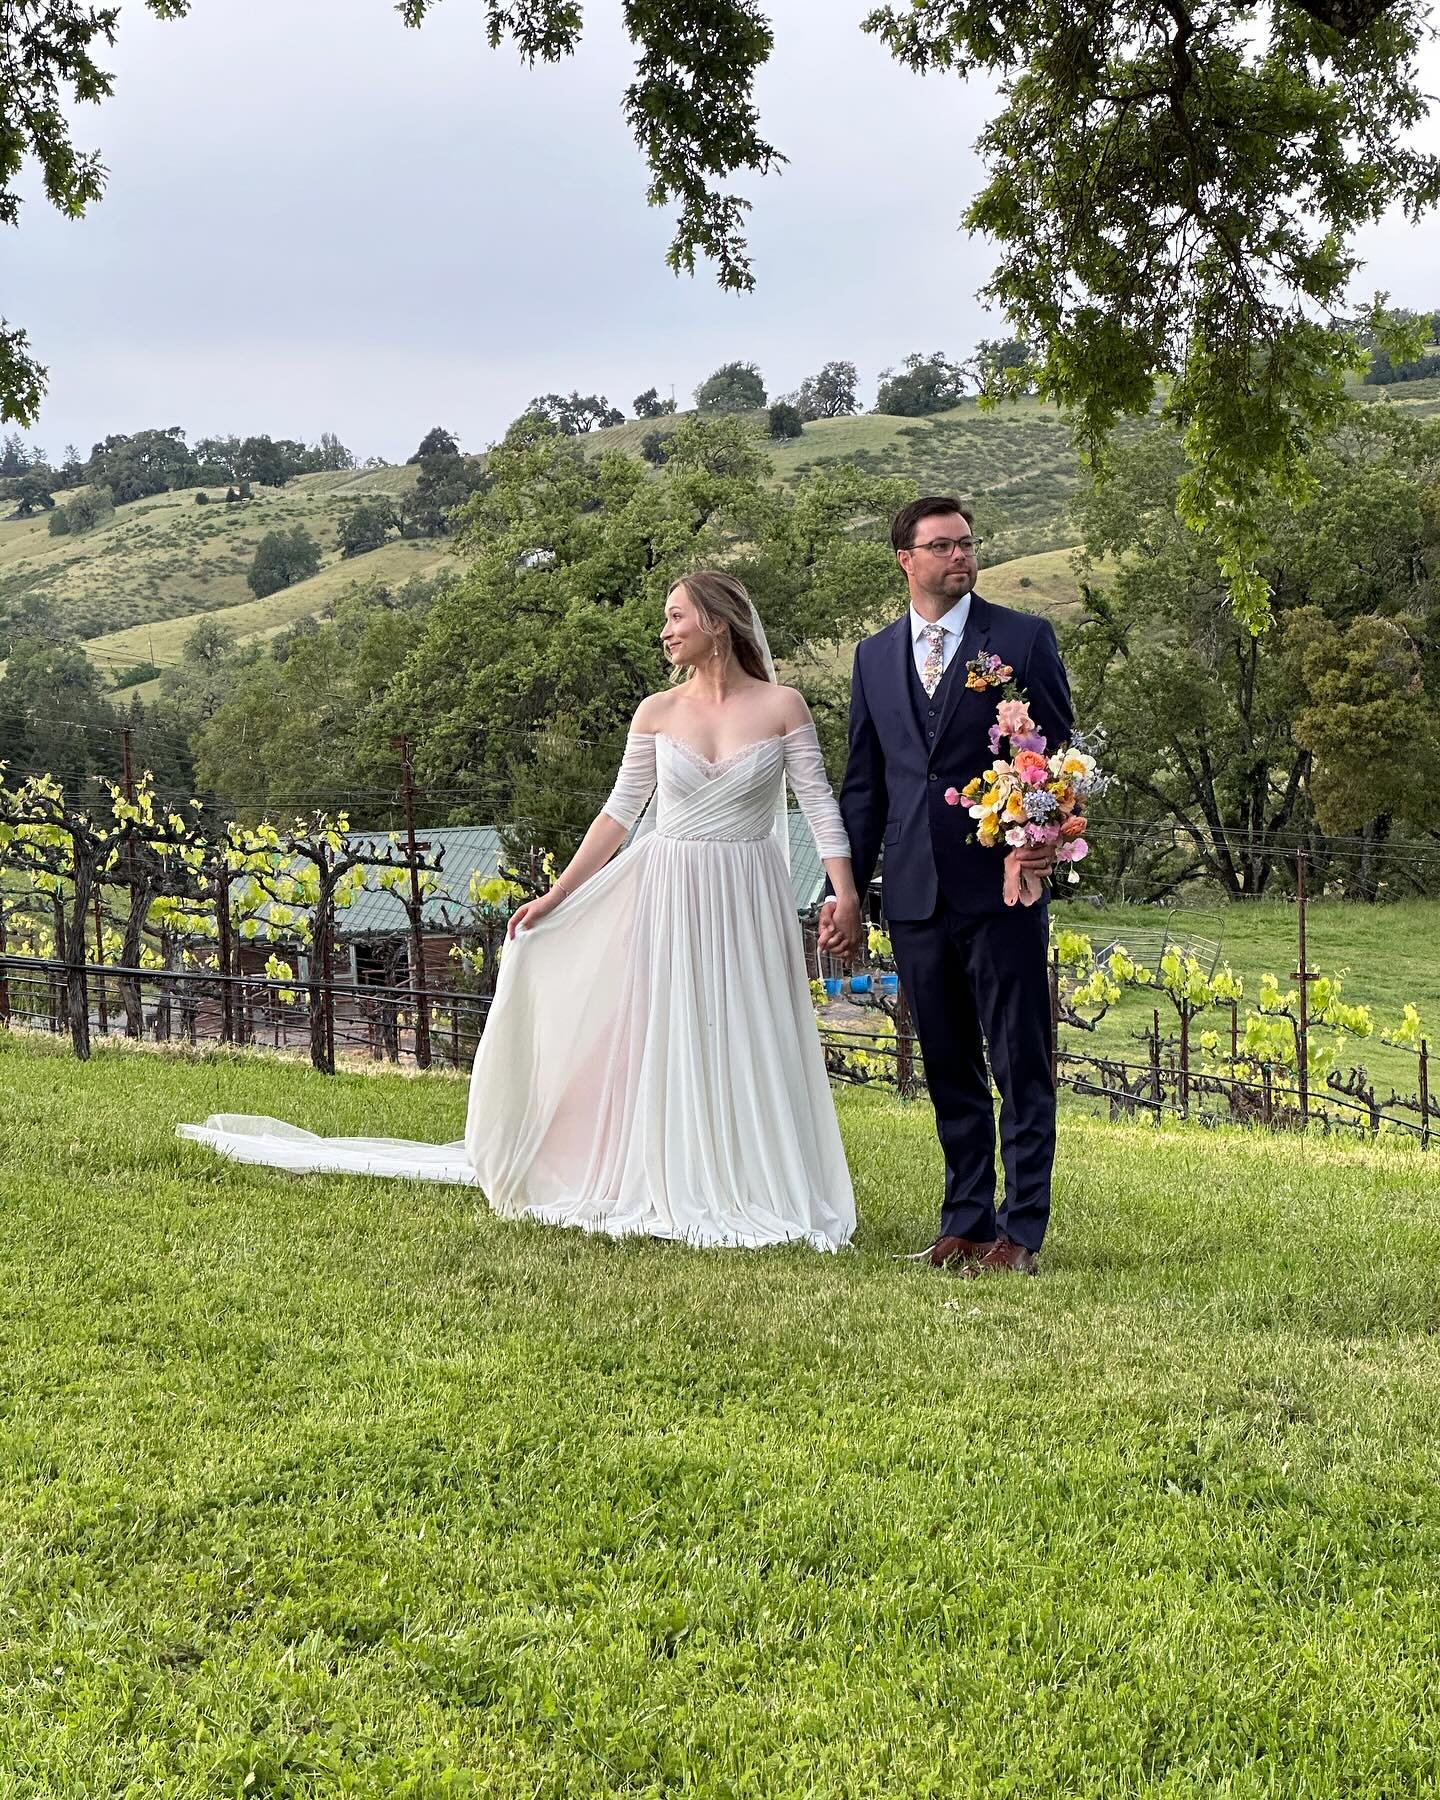 A glimpse of Emily &amp; James&rsquo;s in our upper vineyard at their wedding yesterday. A truly whimsical moment. Can&rsquo;t wait to see the photos from the pro @taratracyphotography 

#thehighlandsestate
#destinationwedding #sonomawedding #napawed